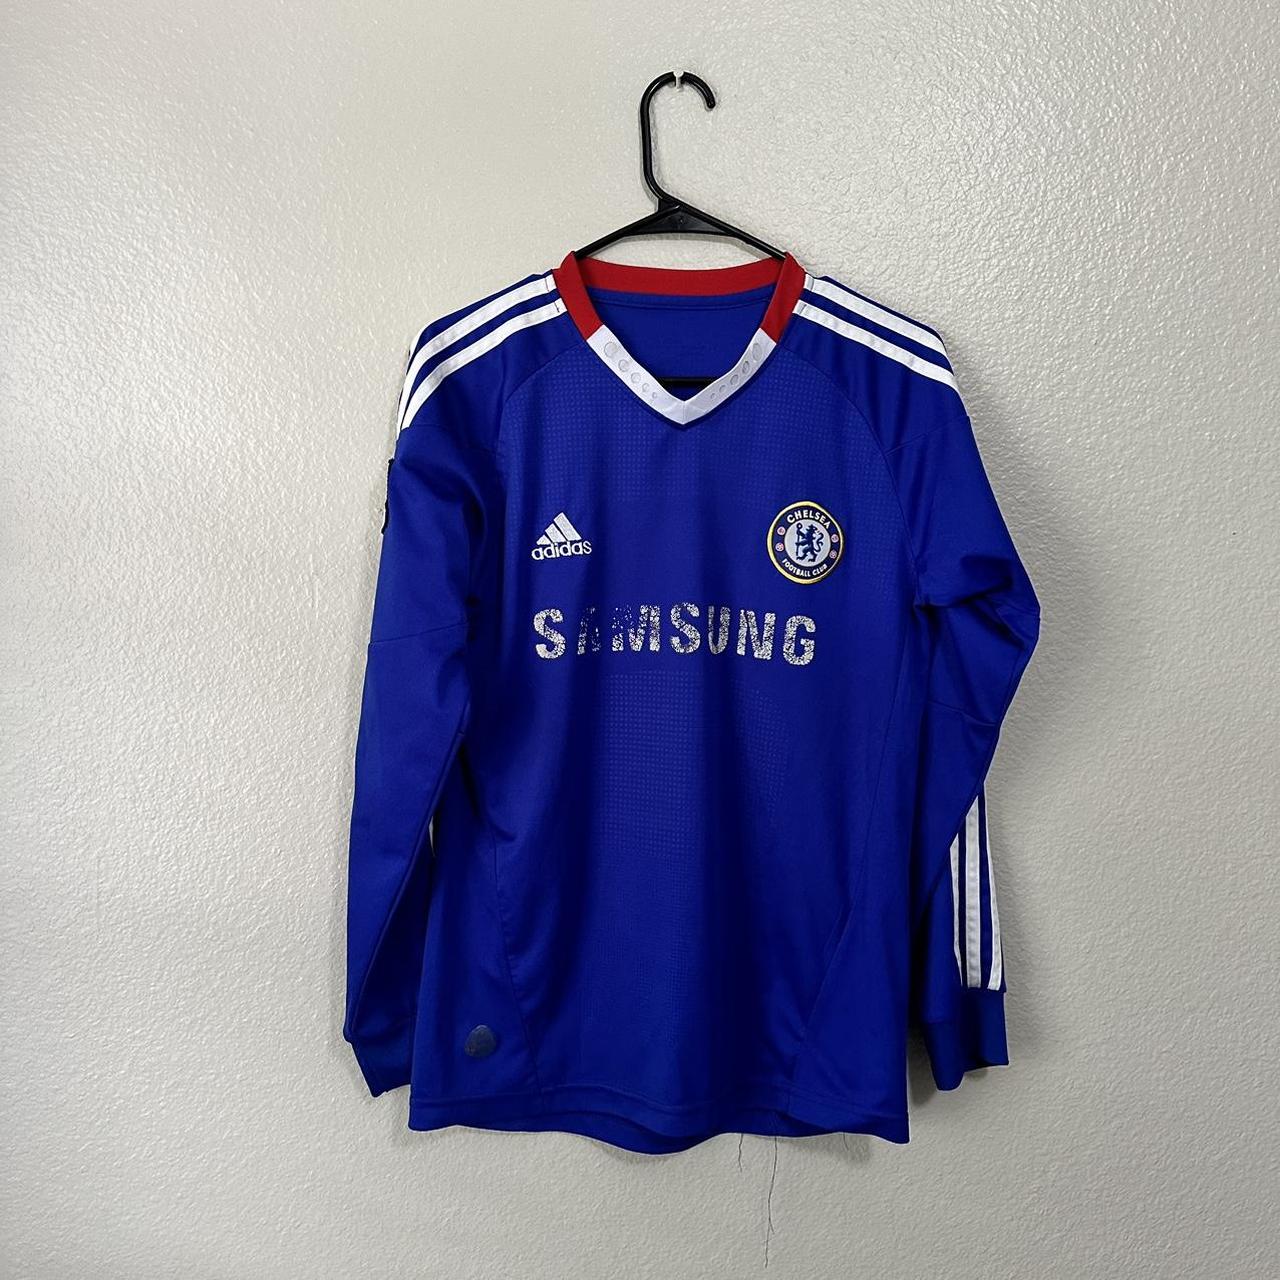 Chelsea adidas soccer jersey No size tag but looks - Depop